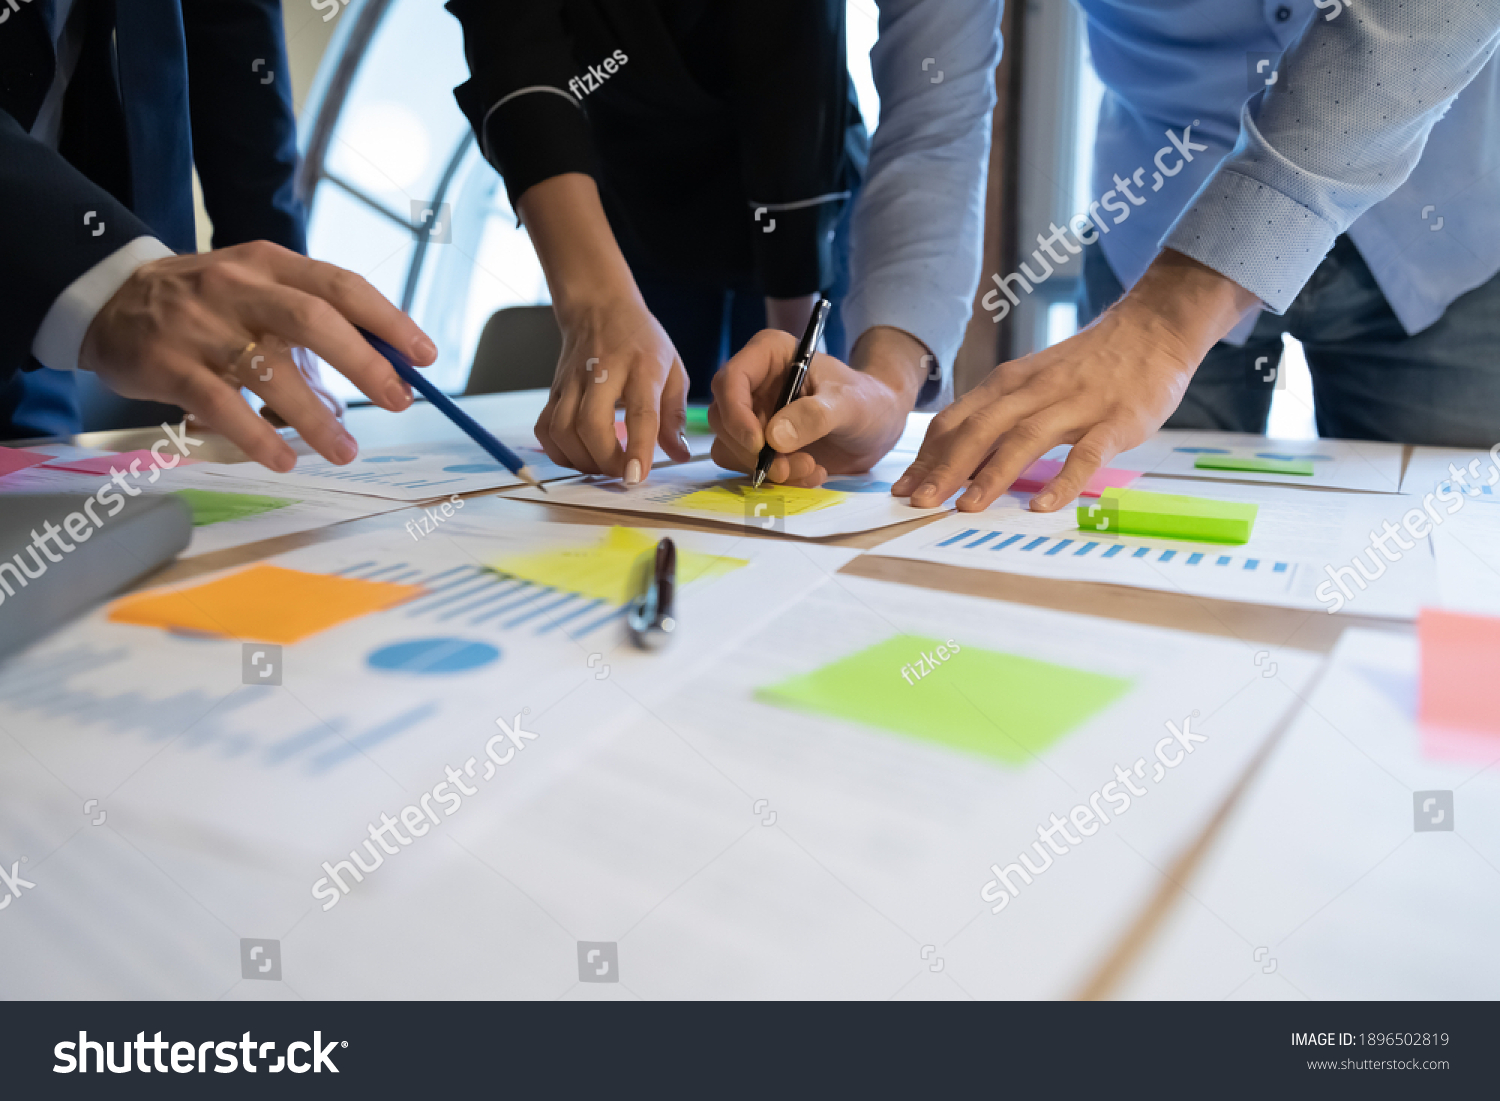 Close up diverse employees working on financial project statistics or report, writing notes on colorful sticky papers, checking documents, coworkers developing business strategy, teamwork #1896502819